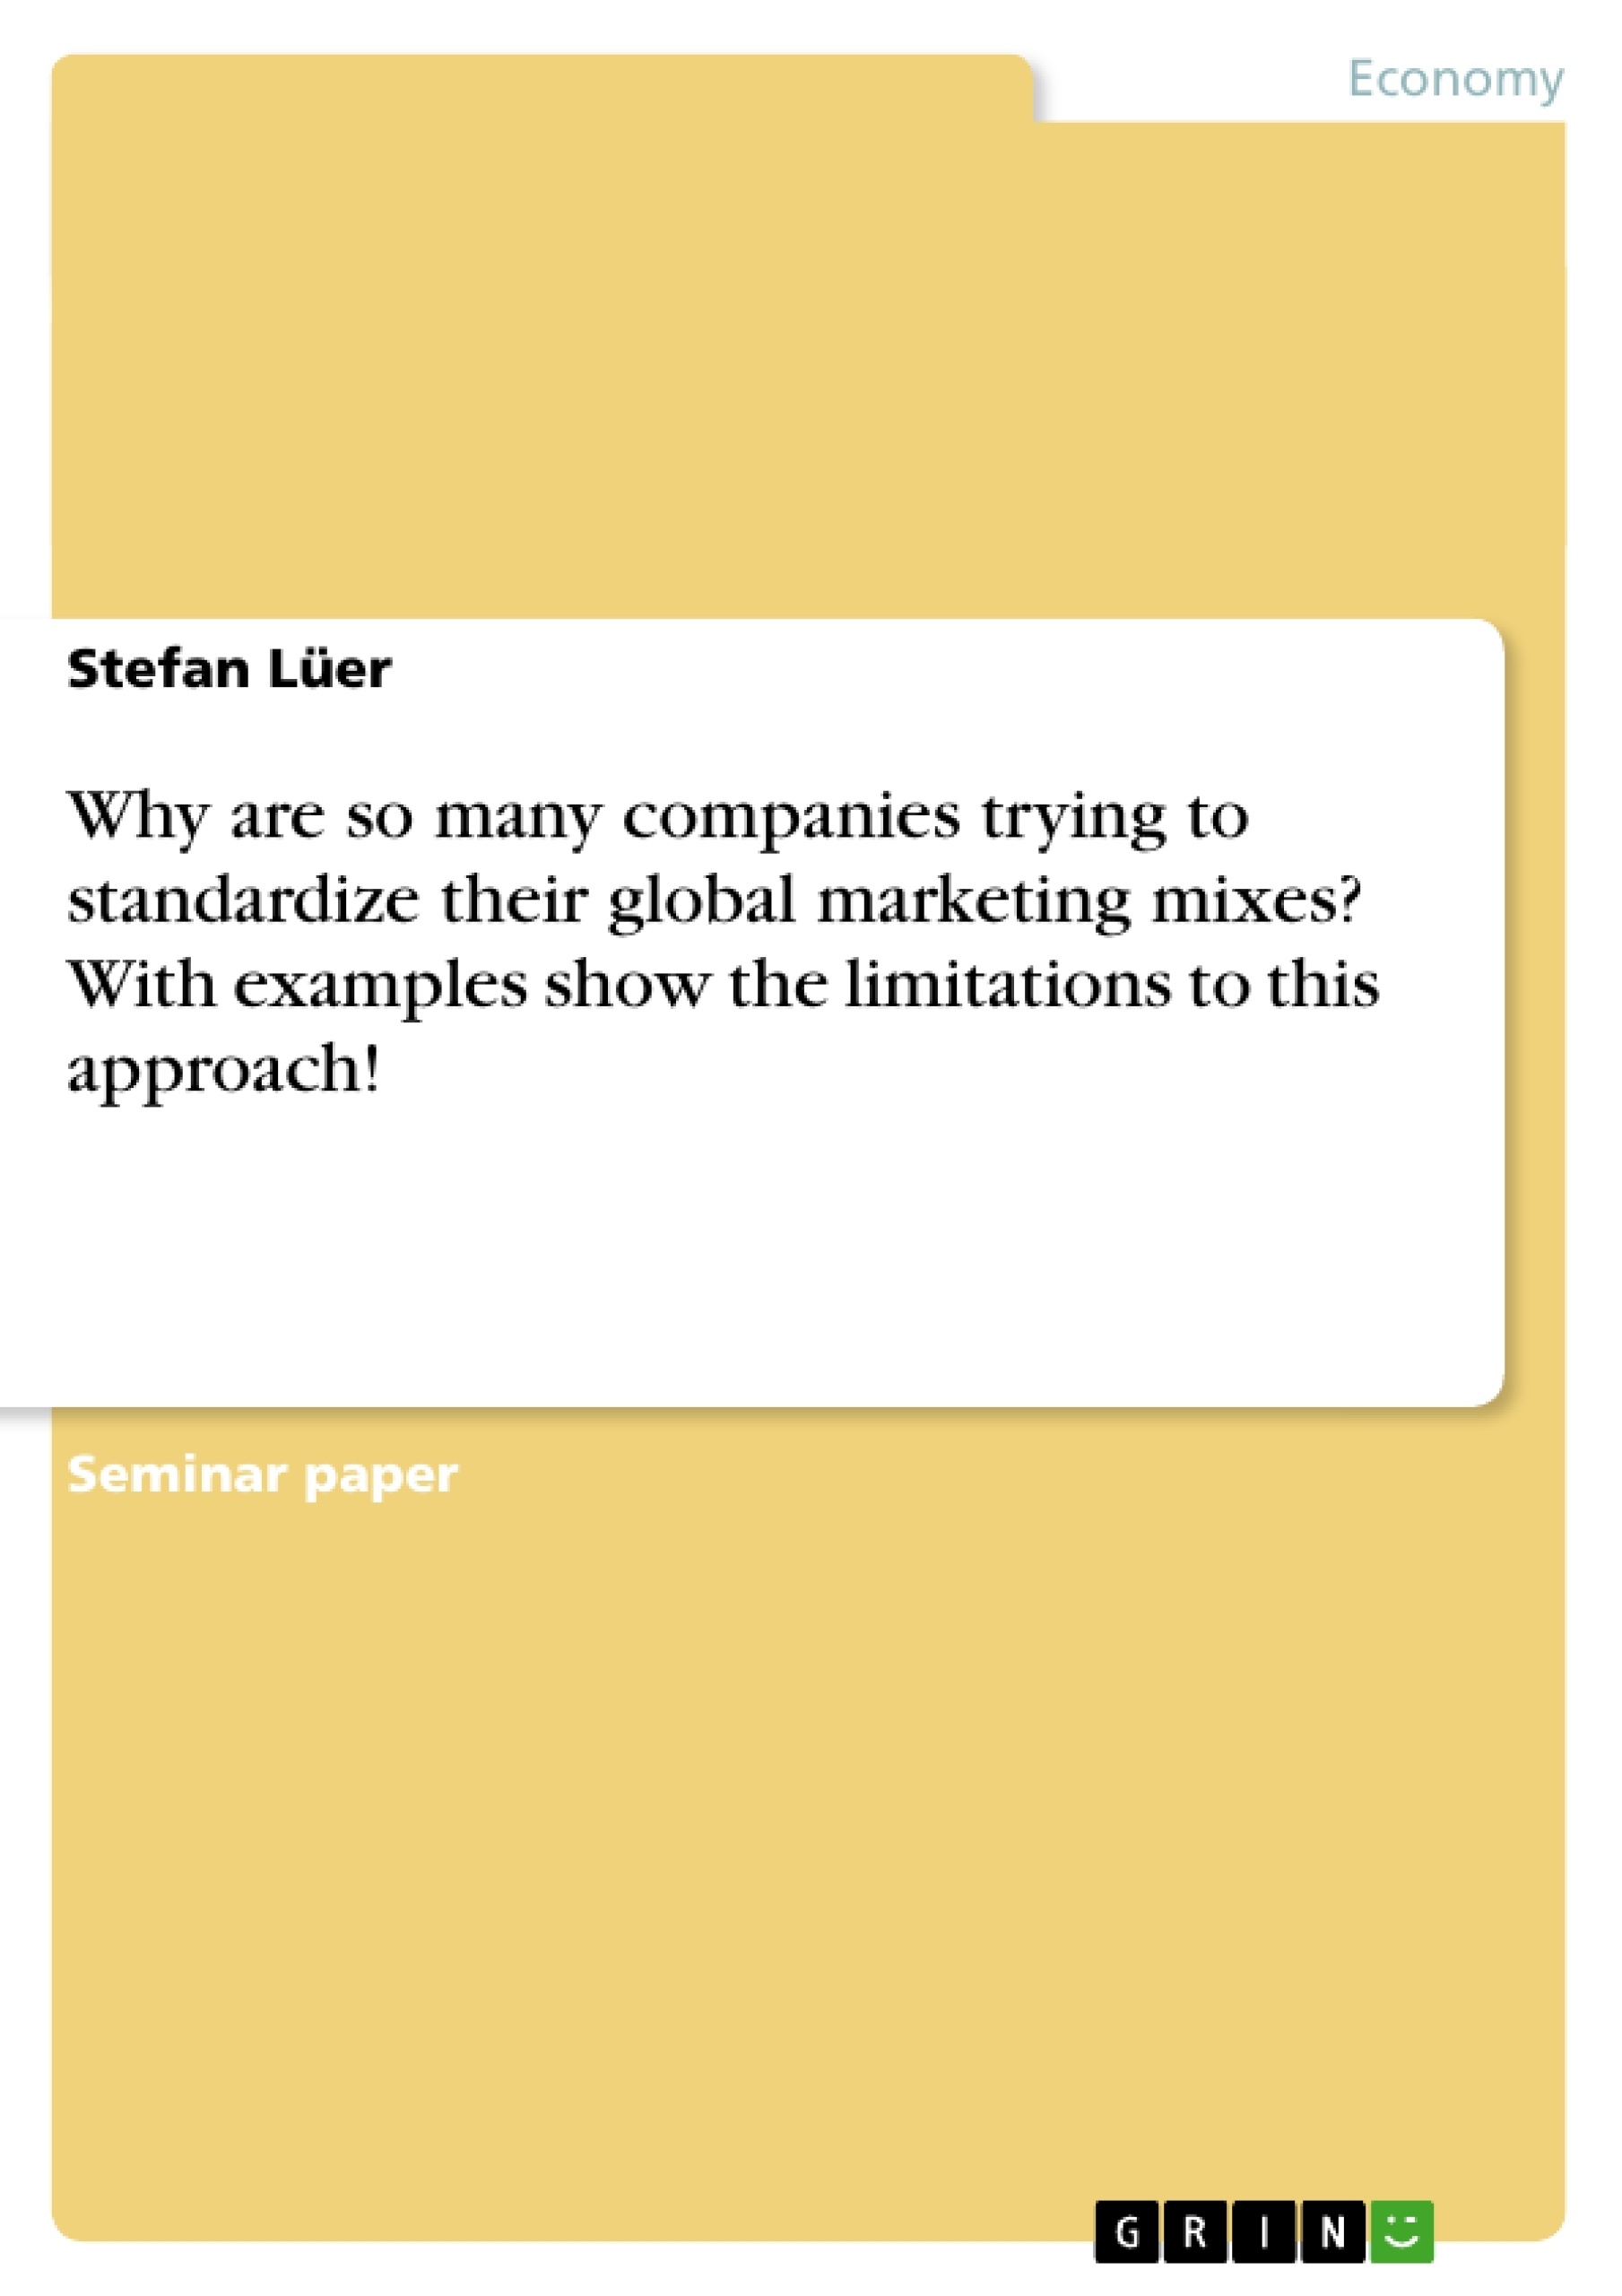 Titel: Why are so many companies trying to standardize their global marketing mixes? With examples show the limitations to this approach!